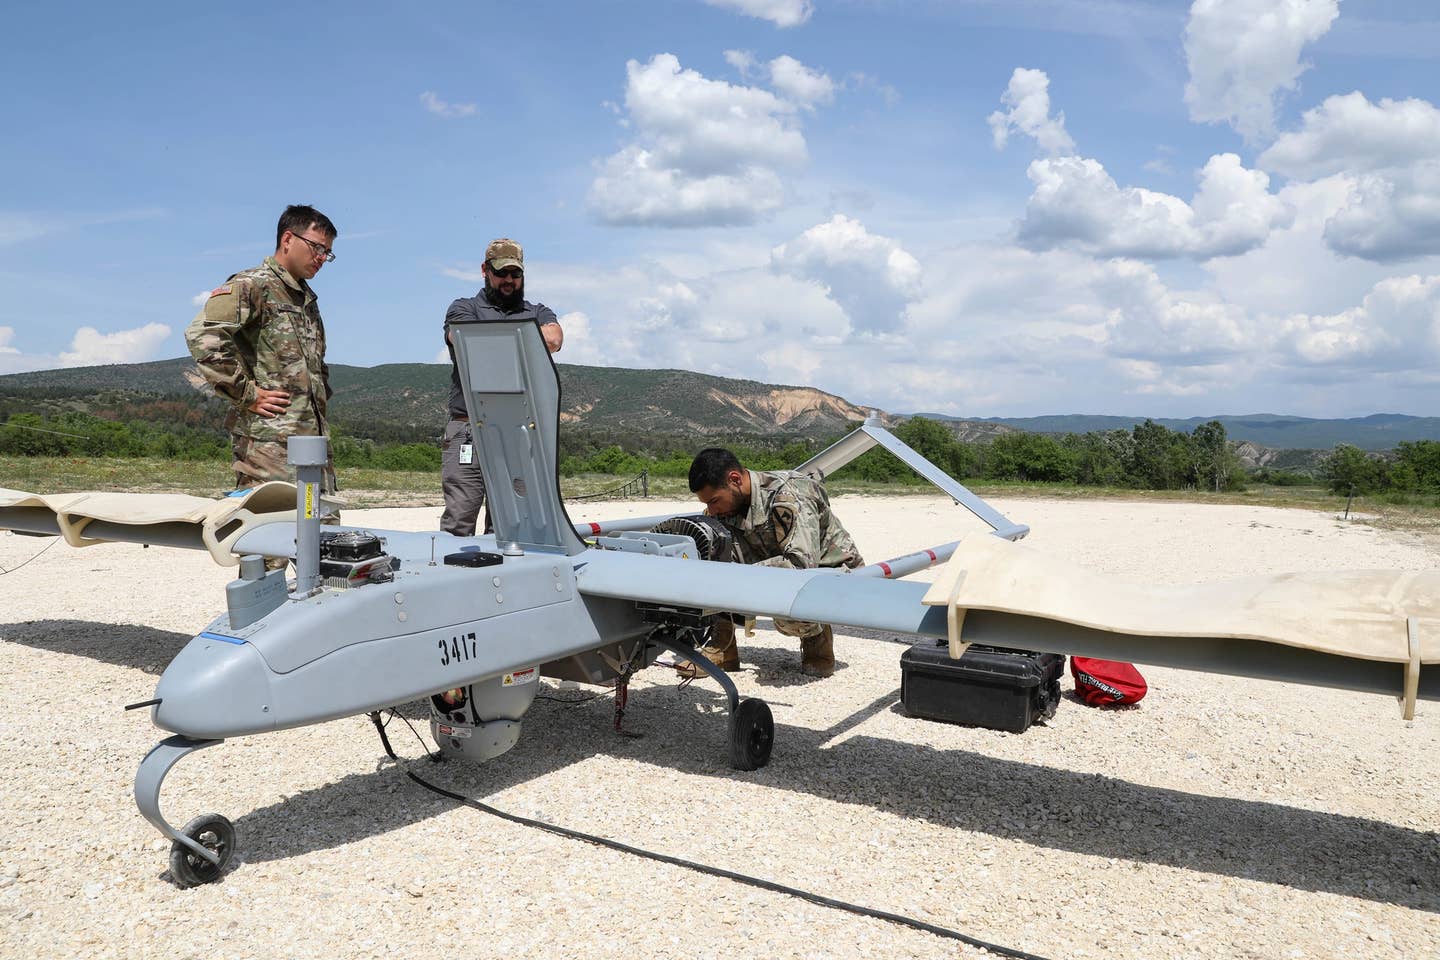 An RQ-7B receives some TLC between missions. (US Army)